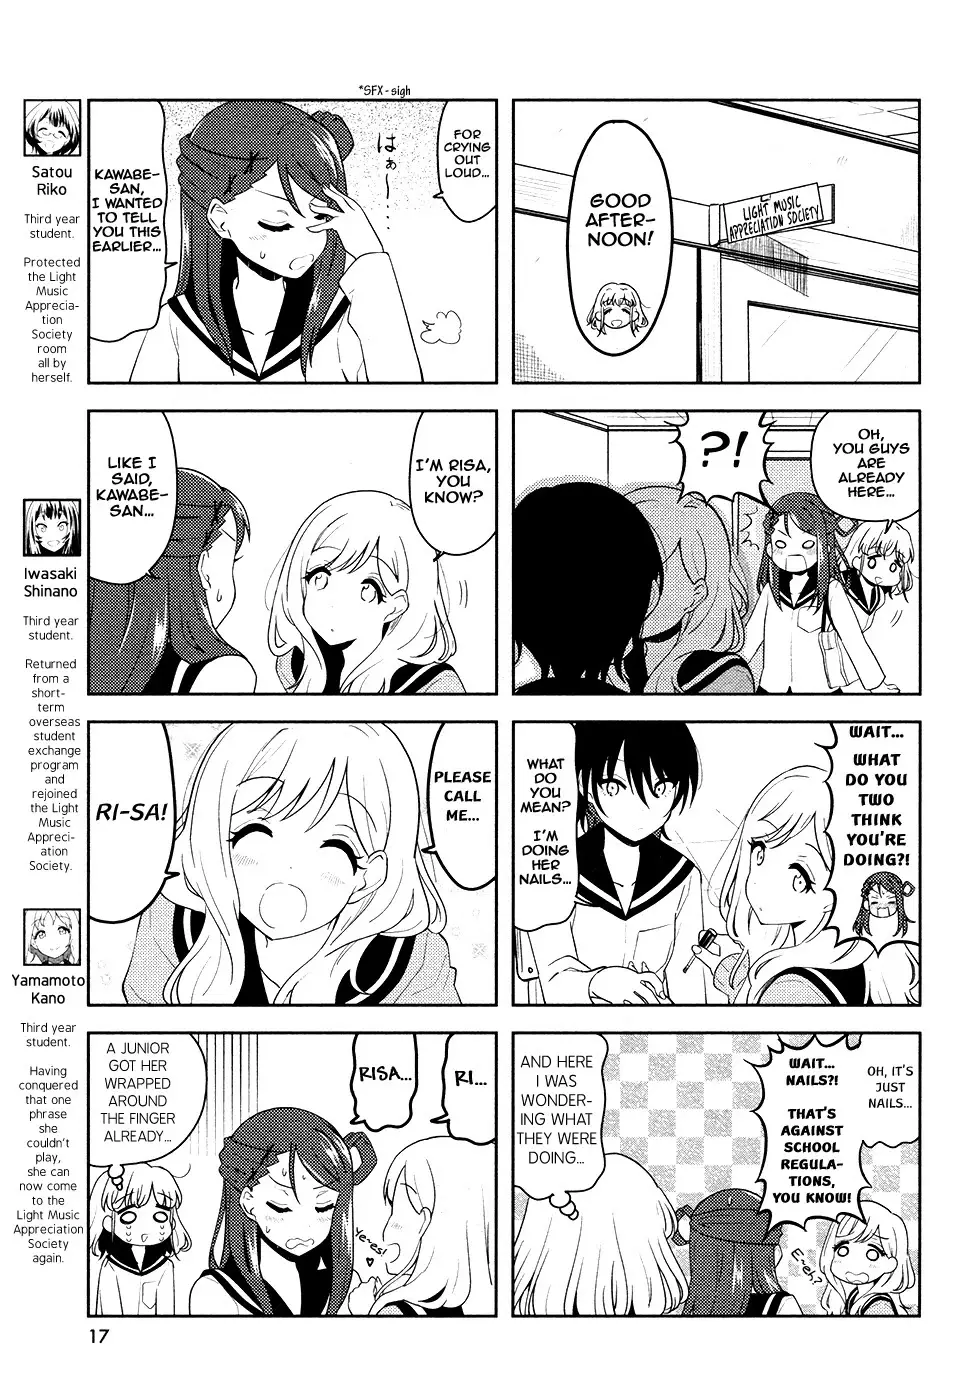 K-On! Shuffle - 23 page 3